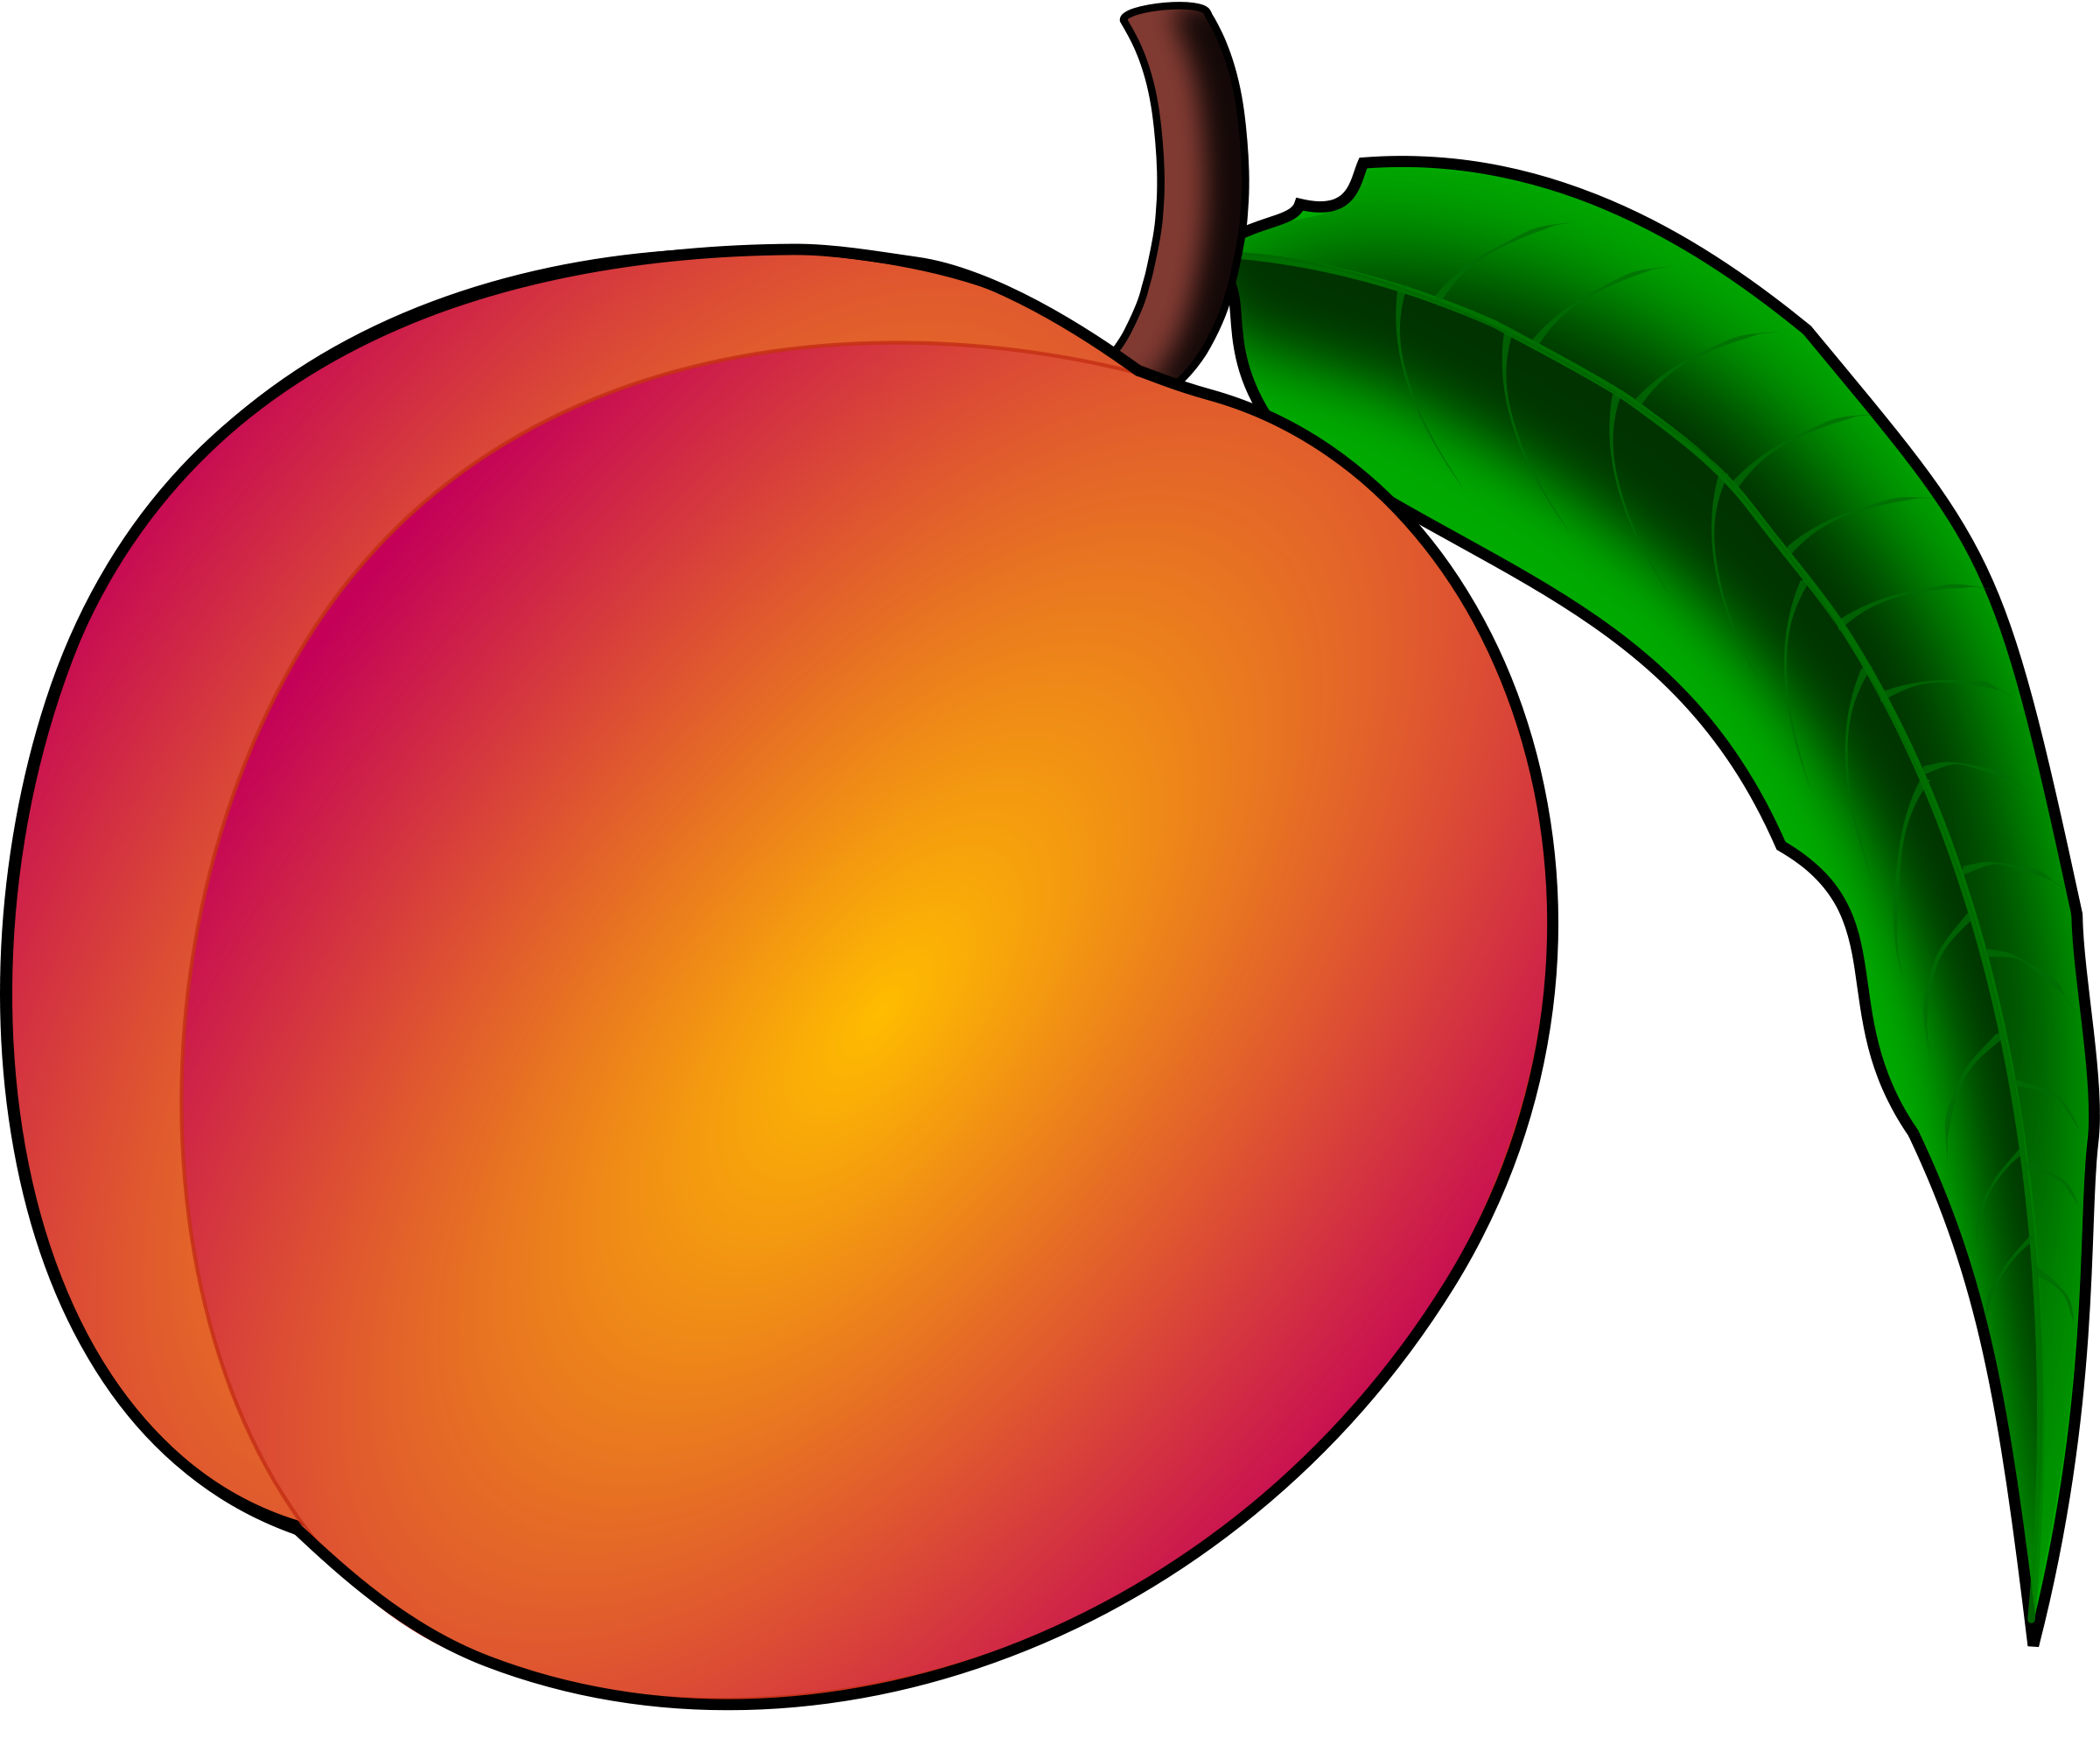 Peach clip art free free clipart images